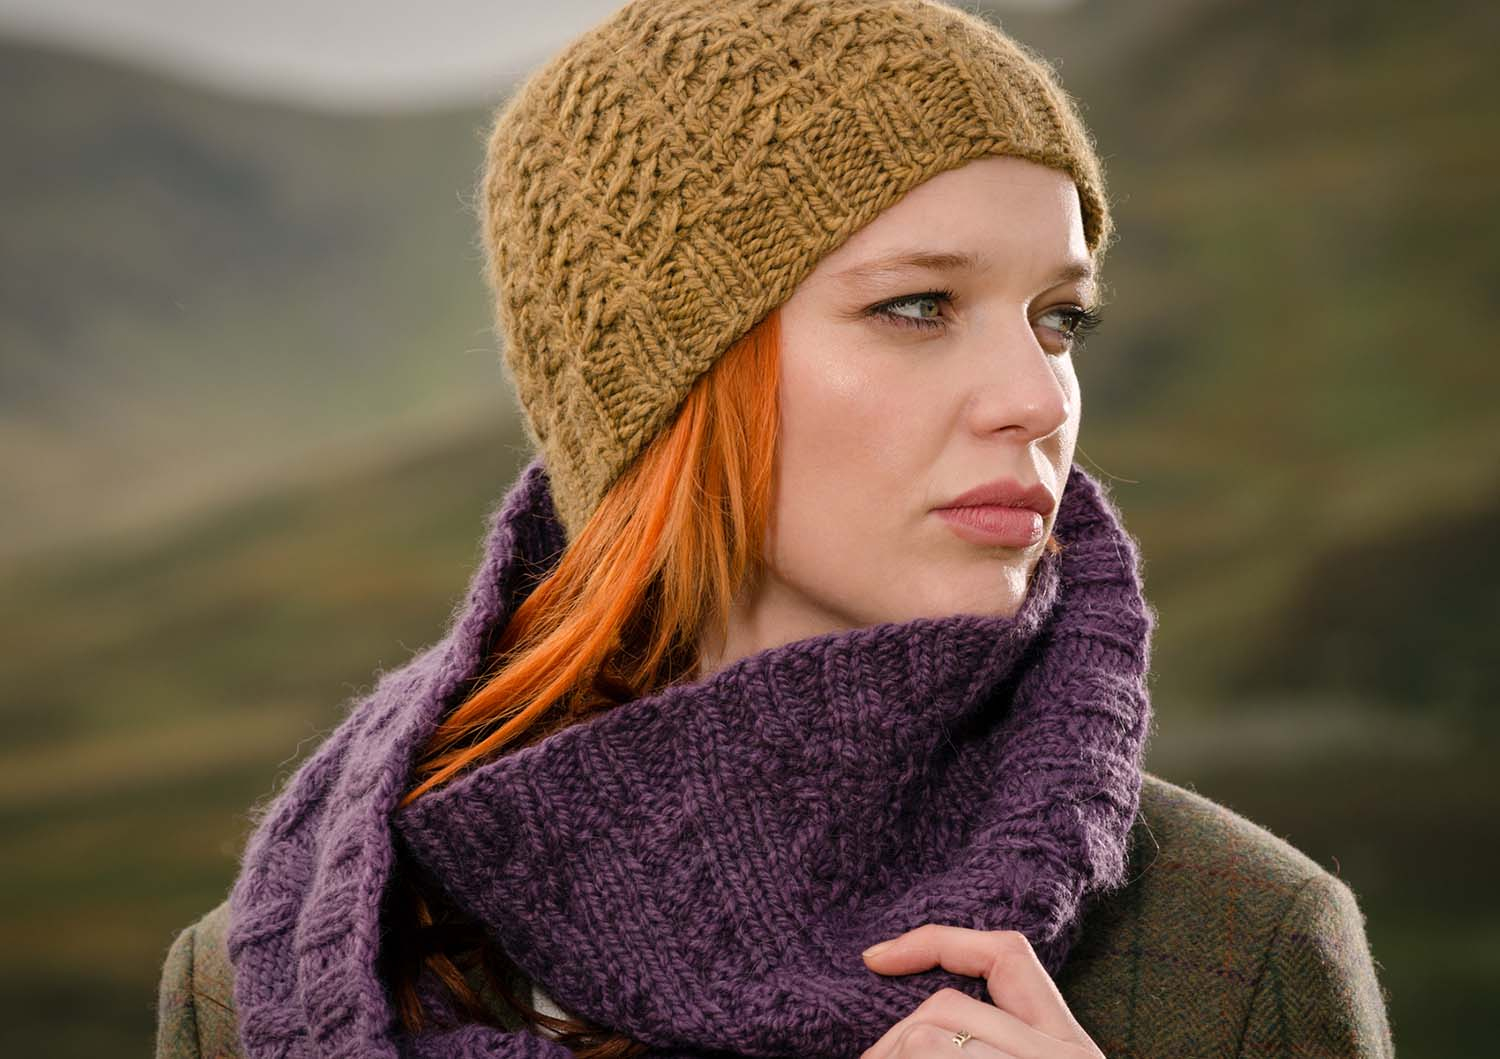 Knitted Hats Patterns 6 Knitted Hat Patterns For Women The Fibre Co